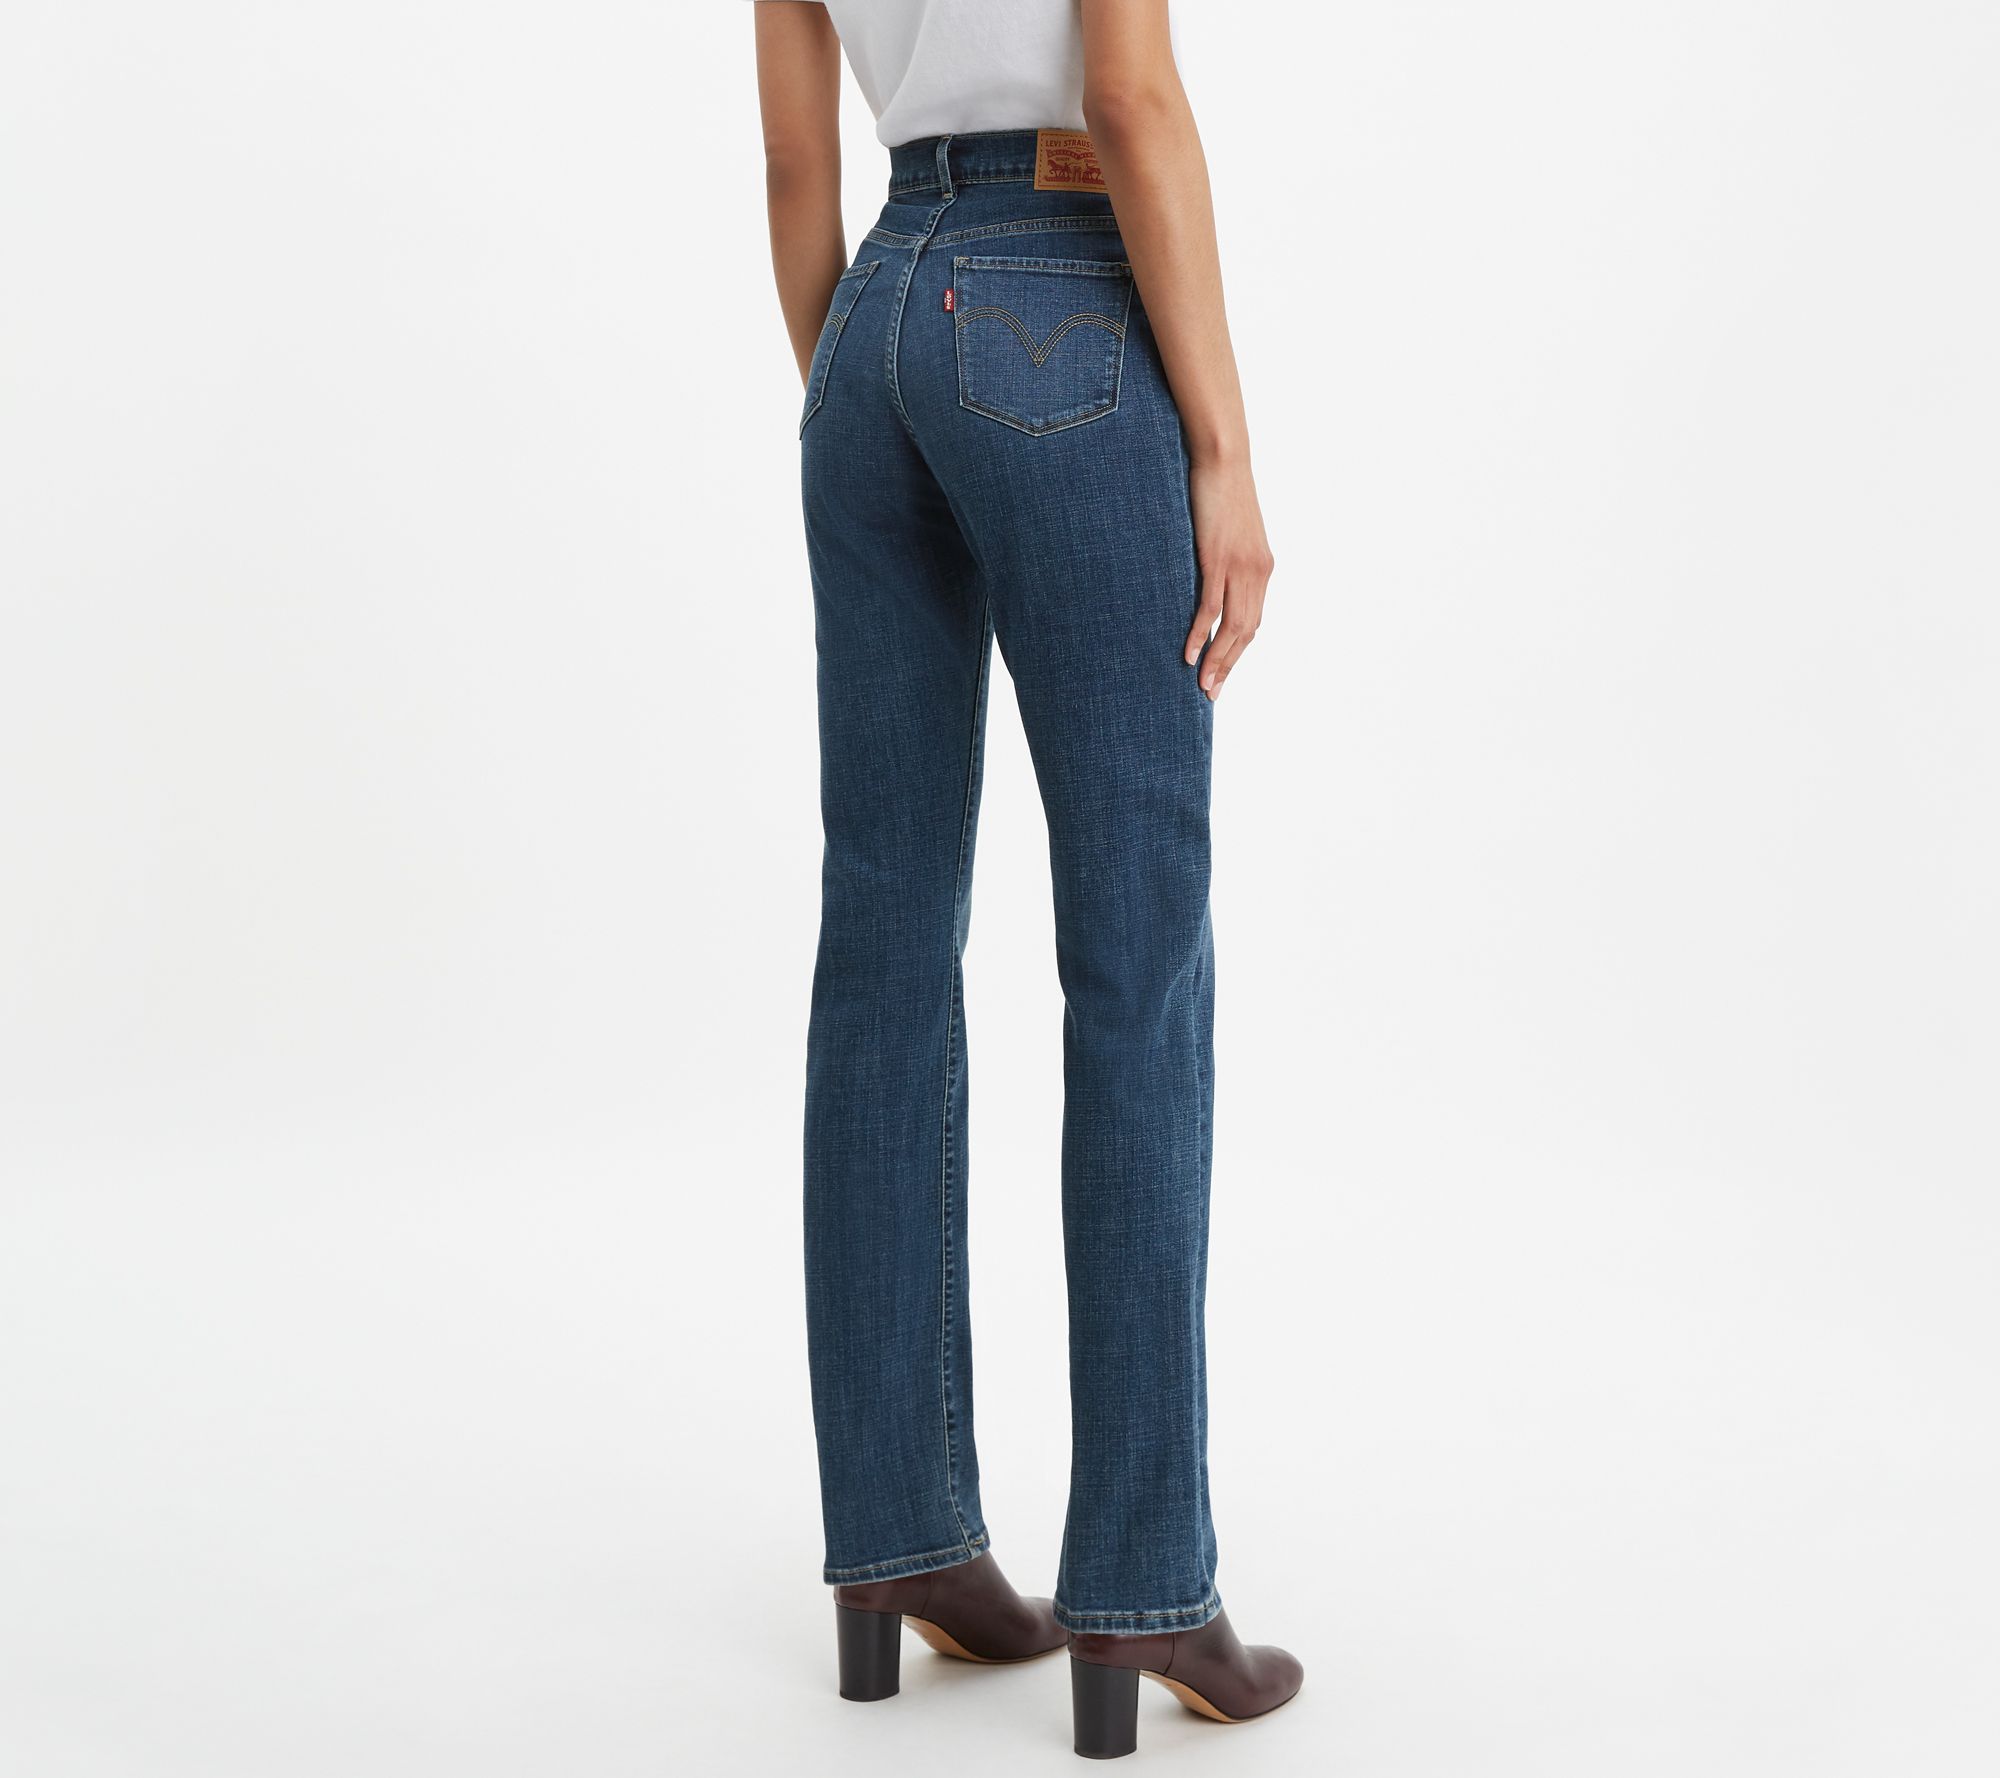 levi's jeans classic straight